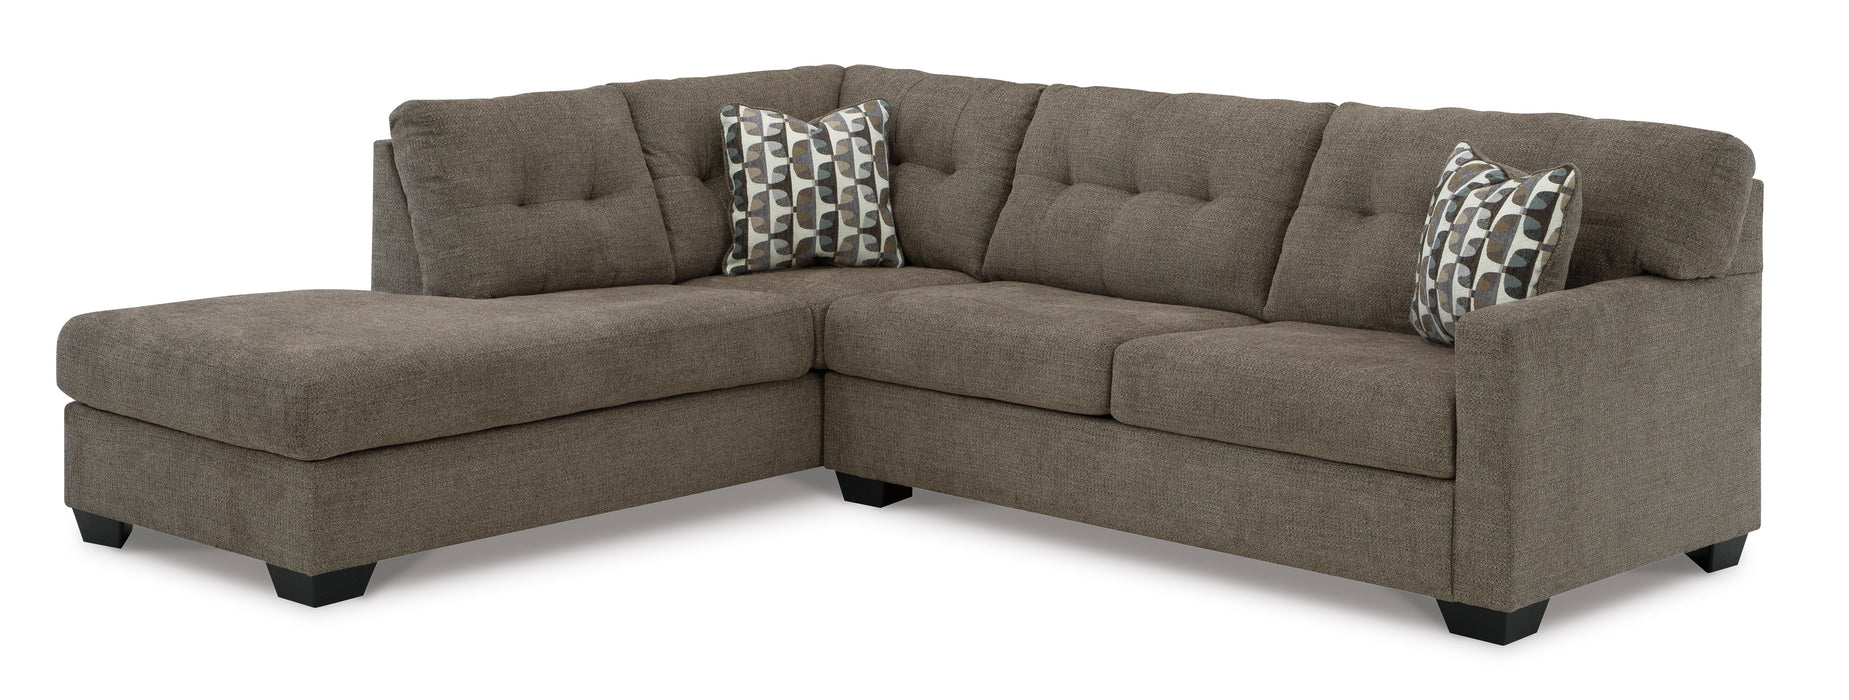 Mahoney 2-Piece Sleeper Sectional with Chaise